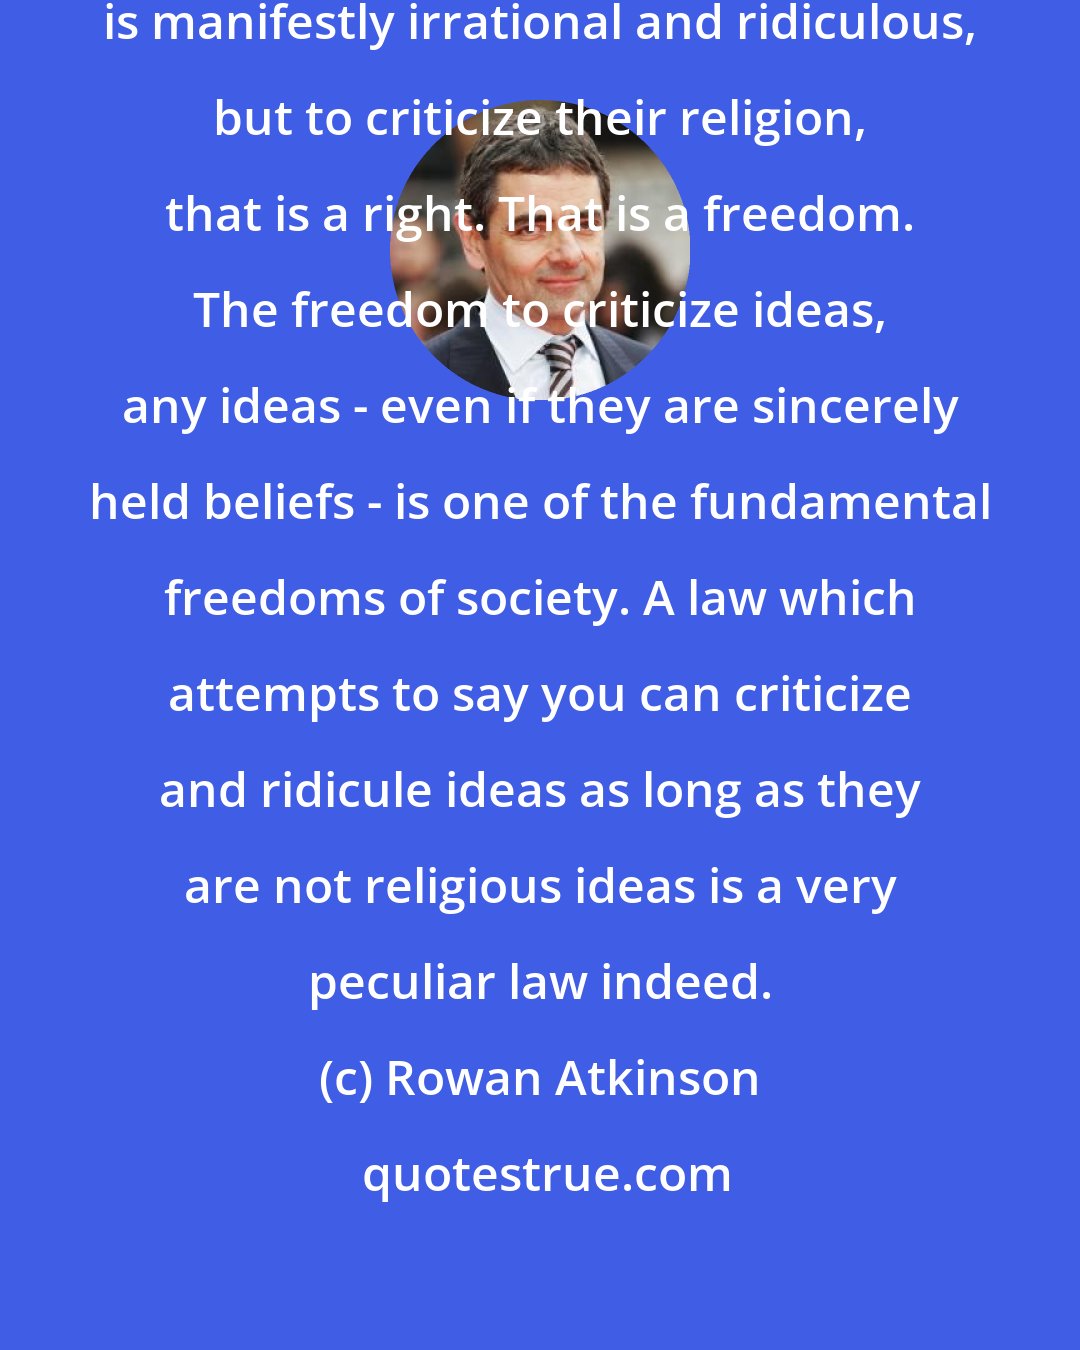 Rowan Atkinson: To criticize a person for their race is manifestly irrational and ridiculous, but to criticize their religion, that is a right. That is a freedom. The freedom to criticize ideas, any ideas - even if they are sincerely held beliefs - is one of the fundamental freedoms of society. A law which attempts to say you can criticize﻿ and ridicule ideas as long as they are not religious ideas is a very peculiar law indeed.